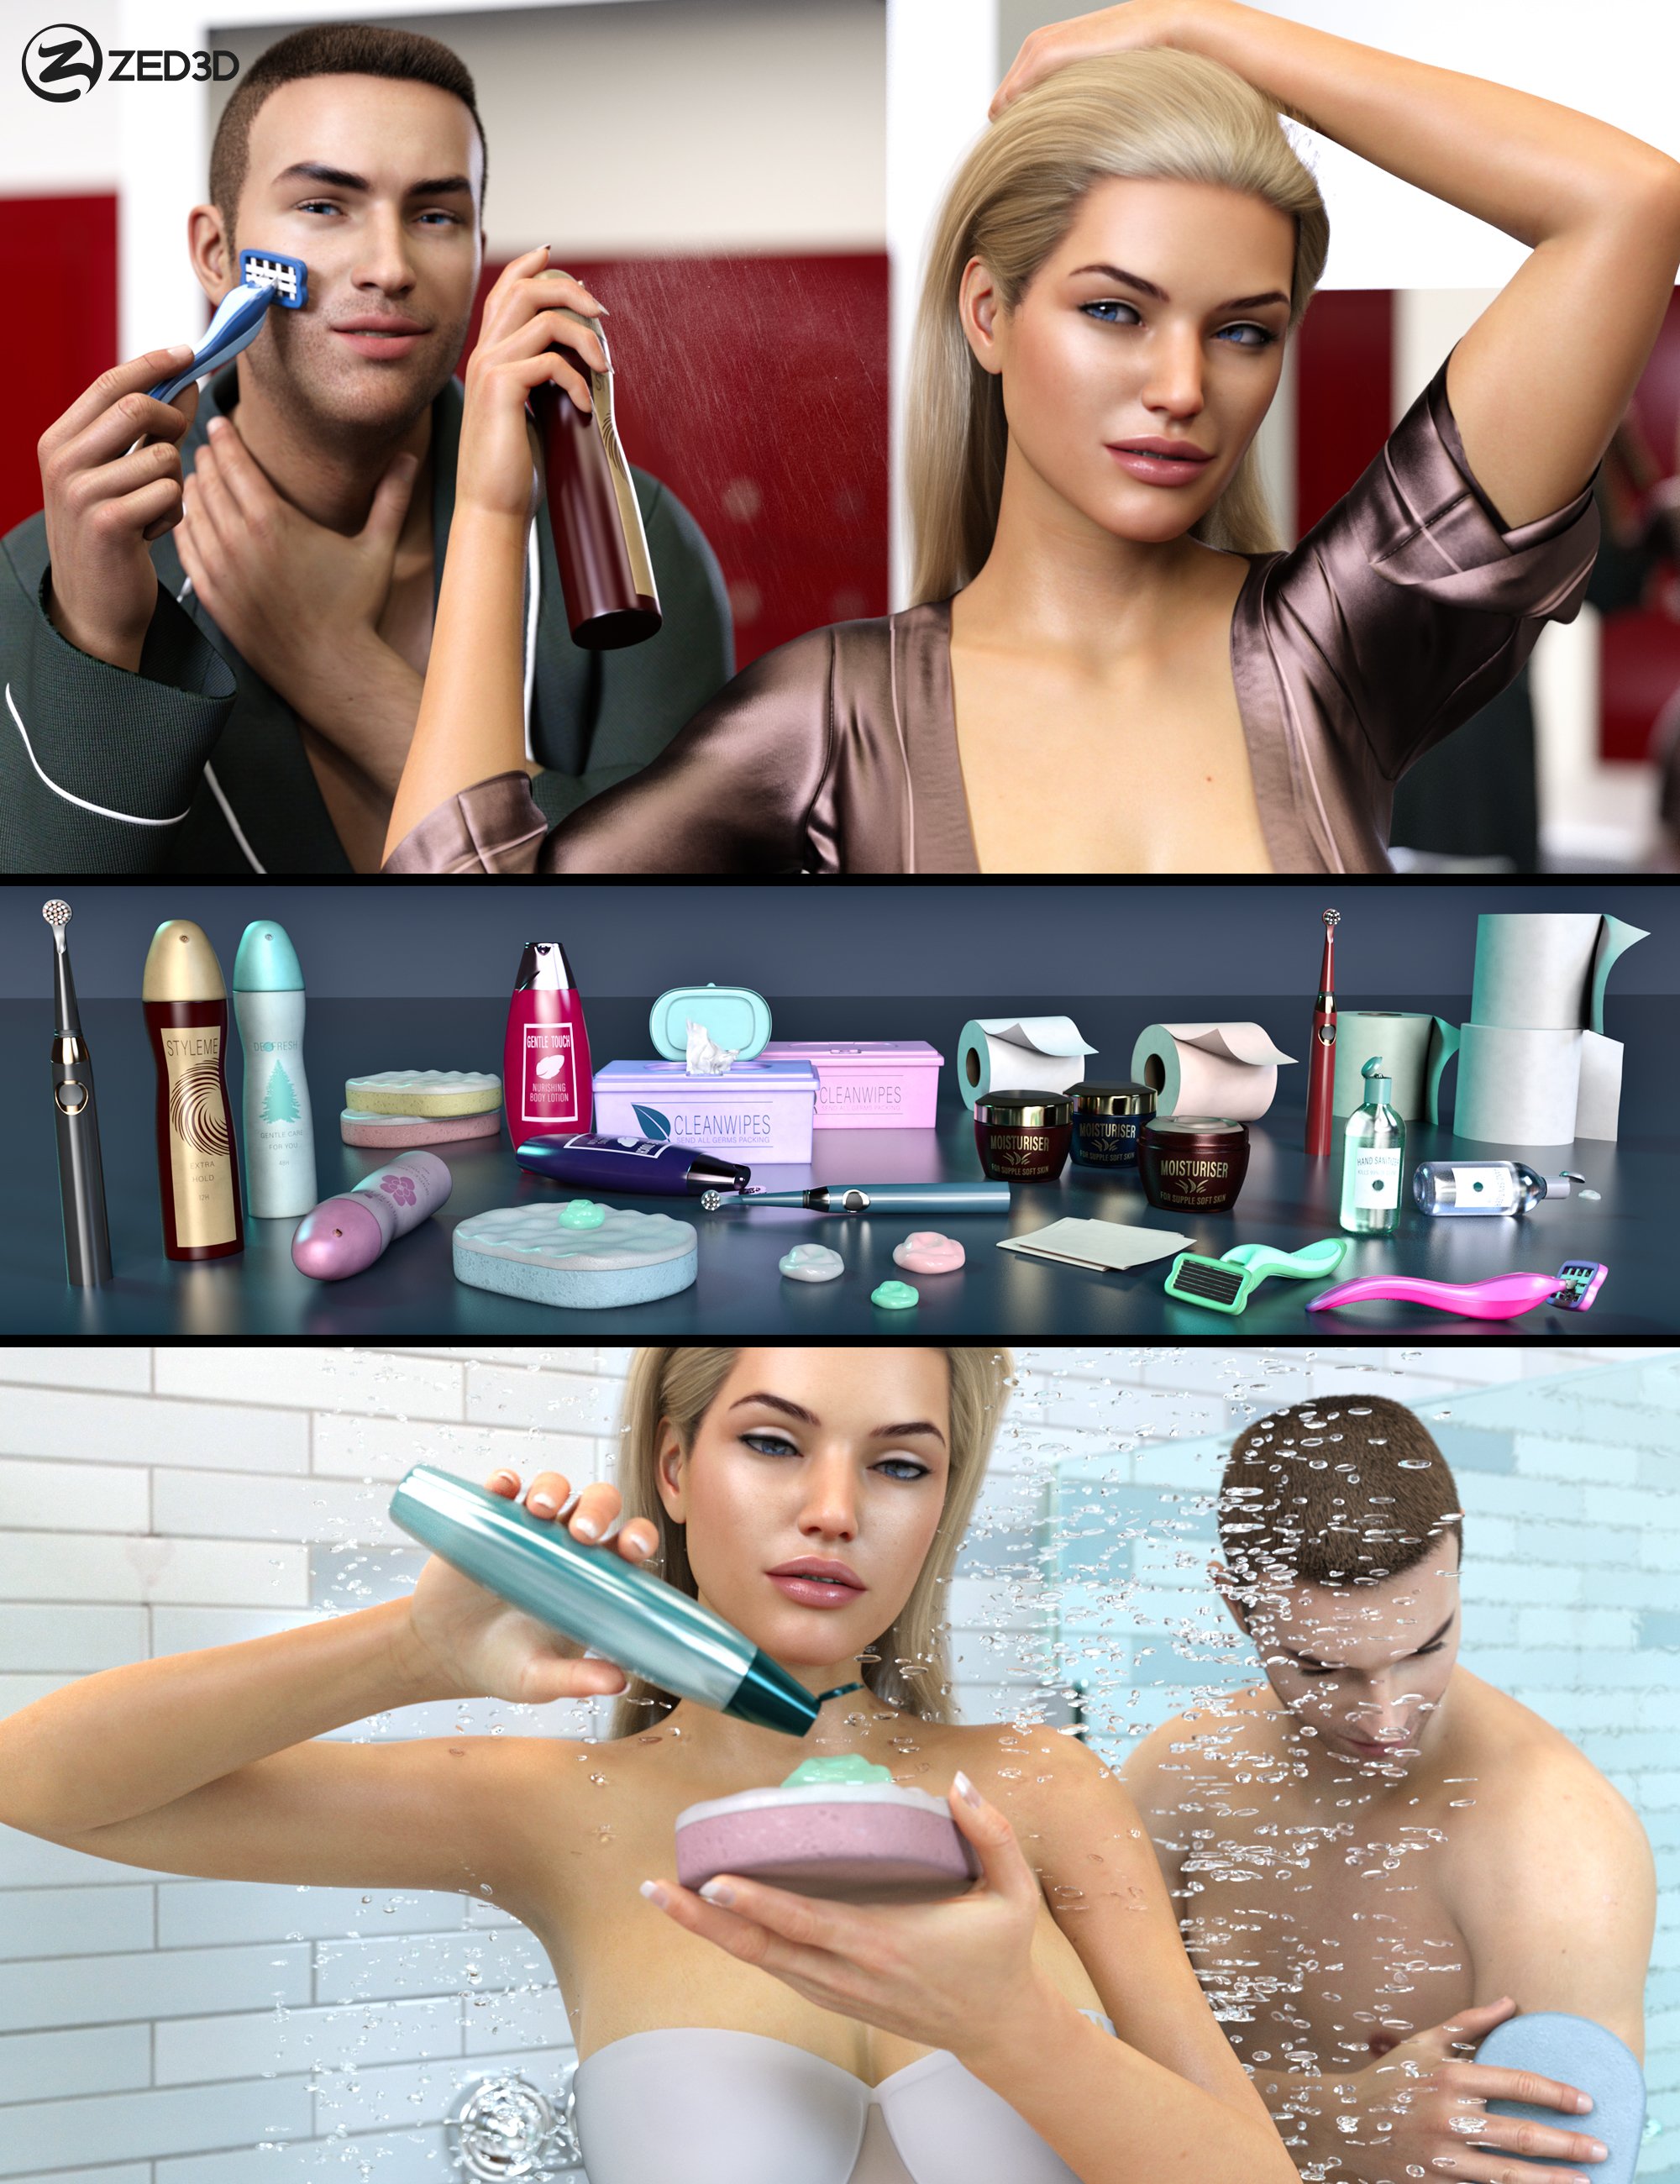 Z Personal Hygiene Props and Poses for Genesis 8 and 8.1 by: Zeddicuss, 3D Models by Daz 3D